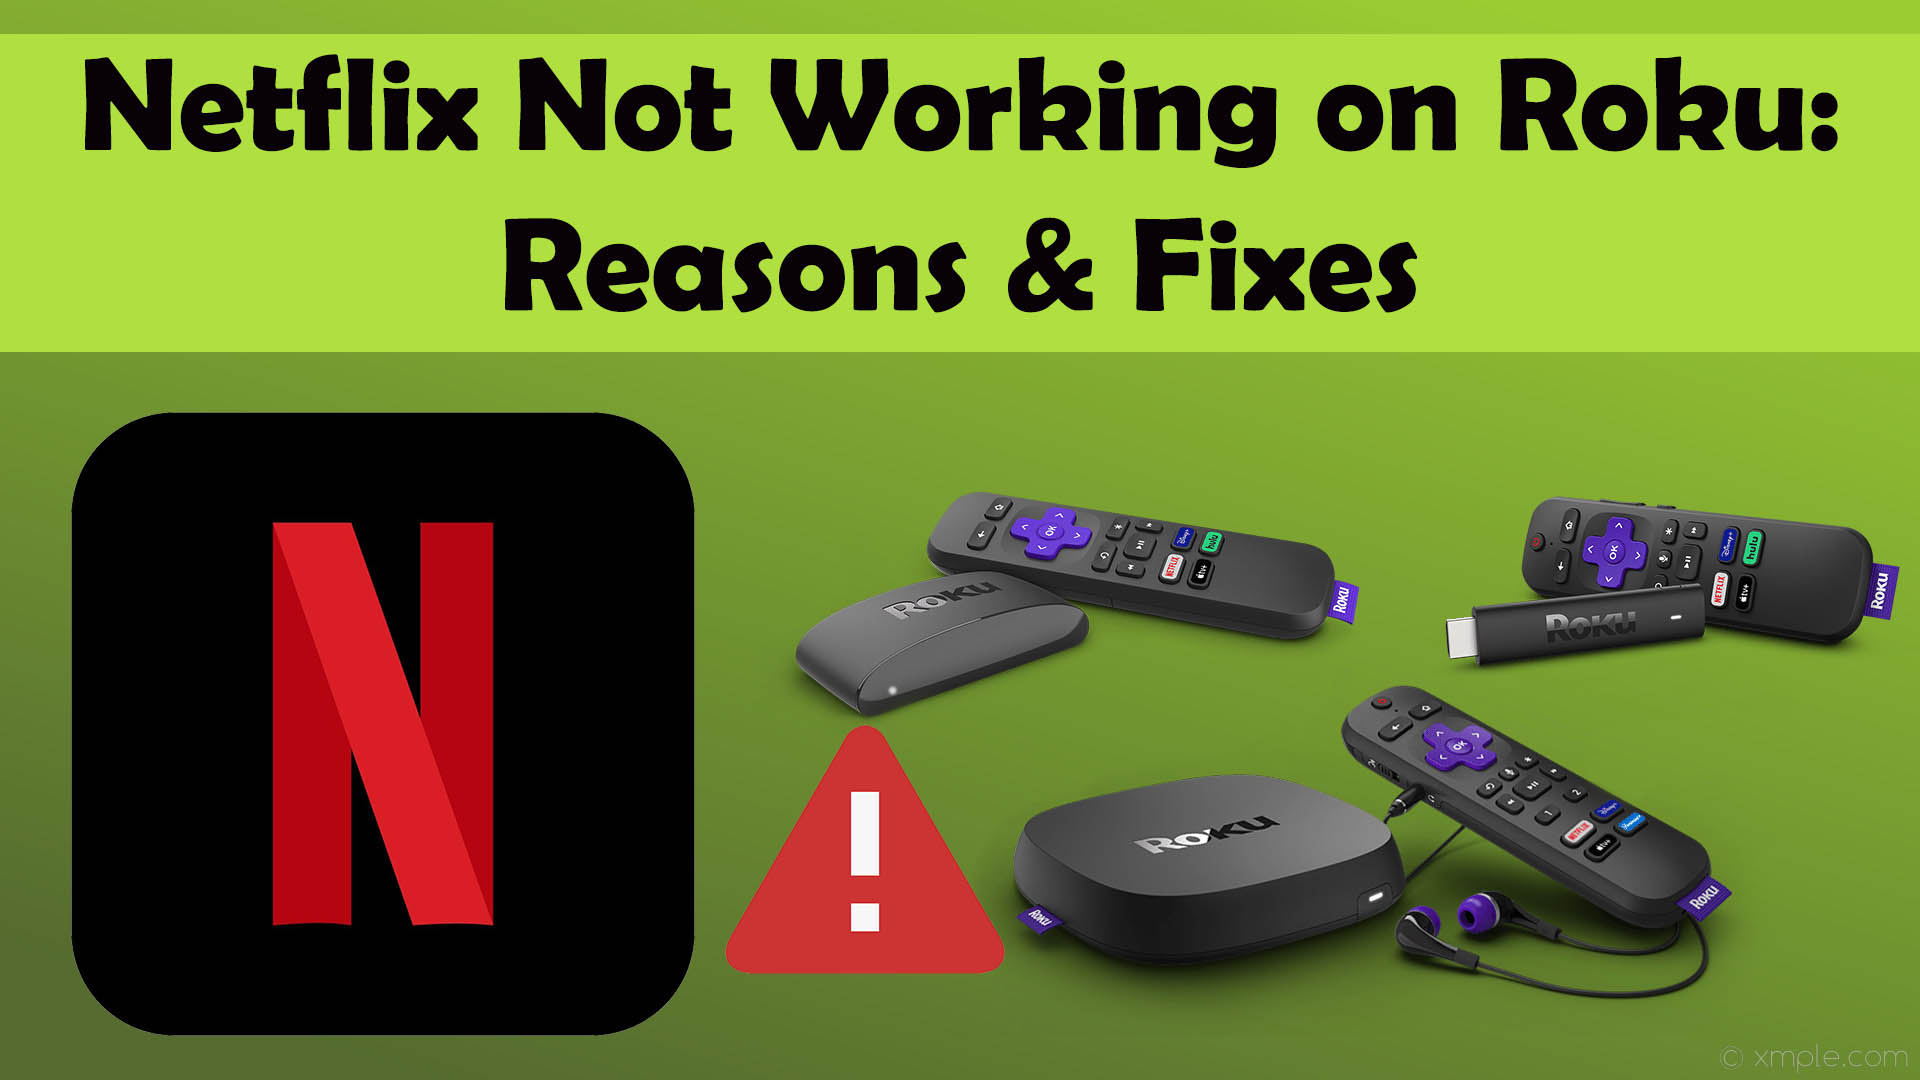 Reasons & Fixes for the Netflix Not Working on Roku TV